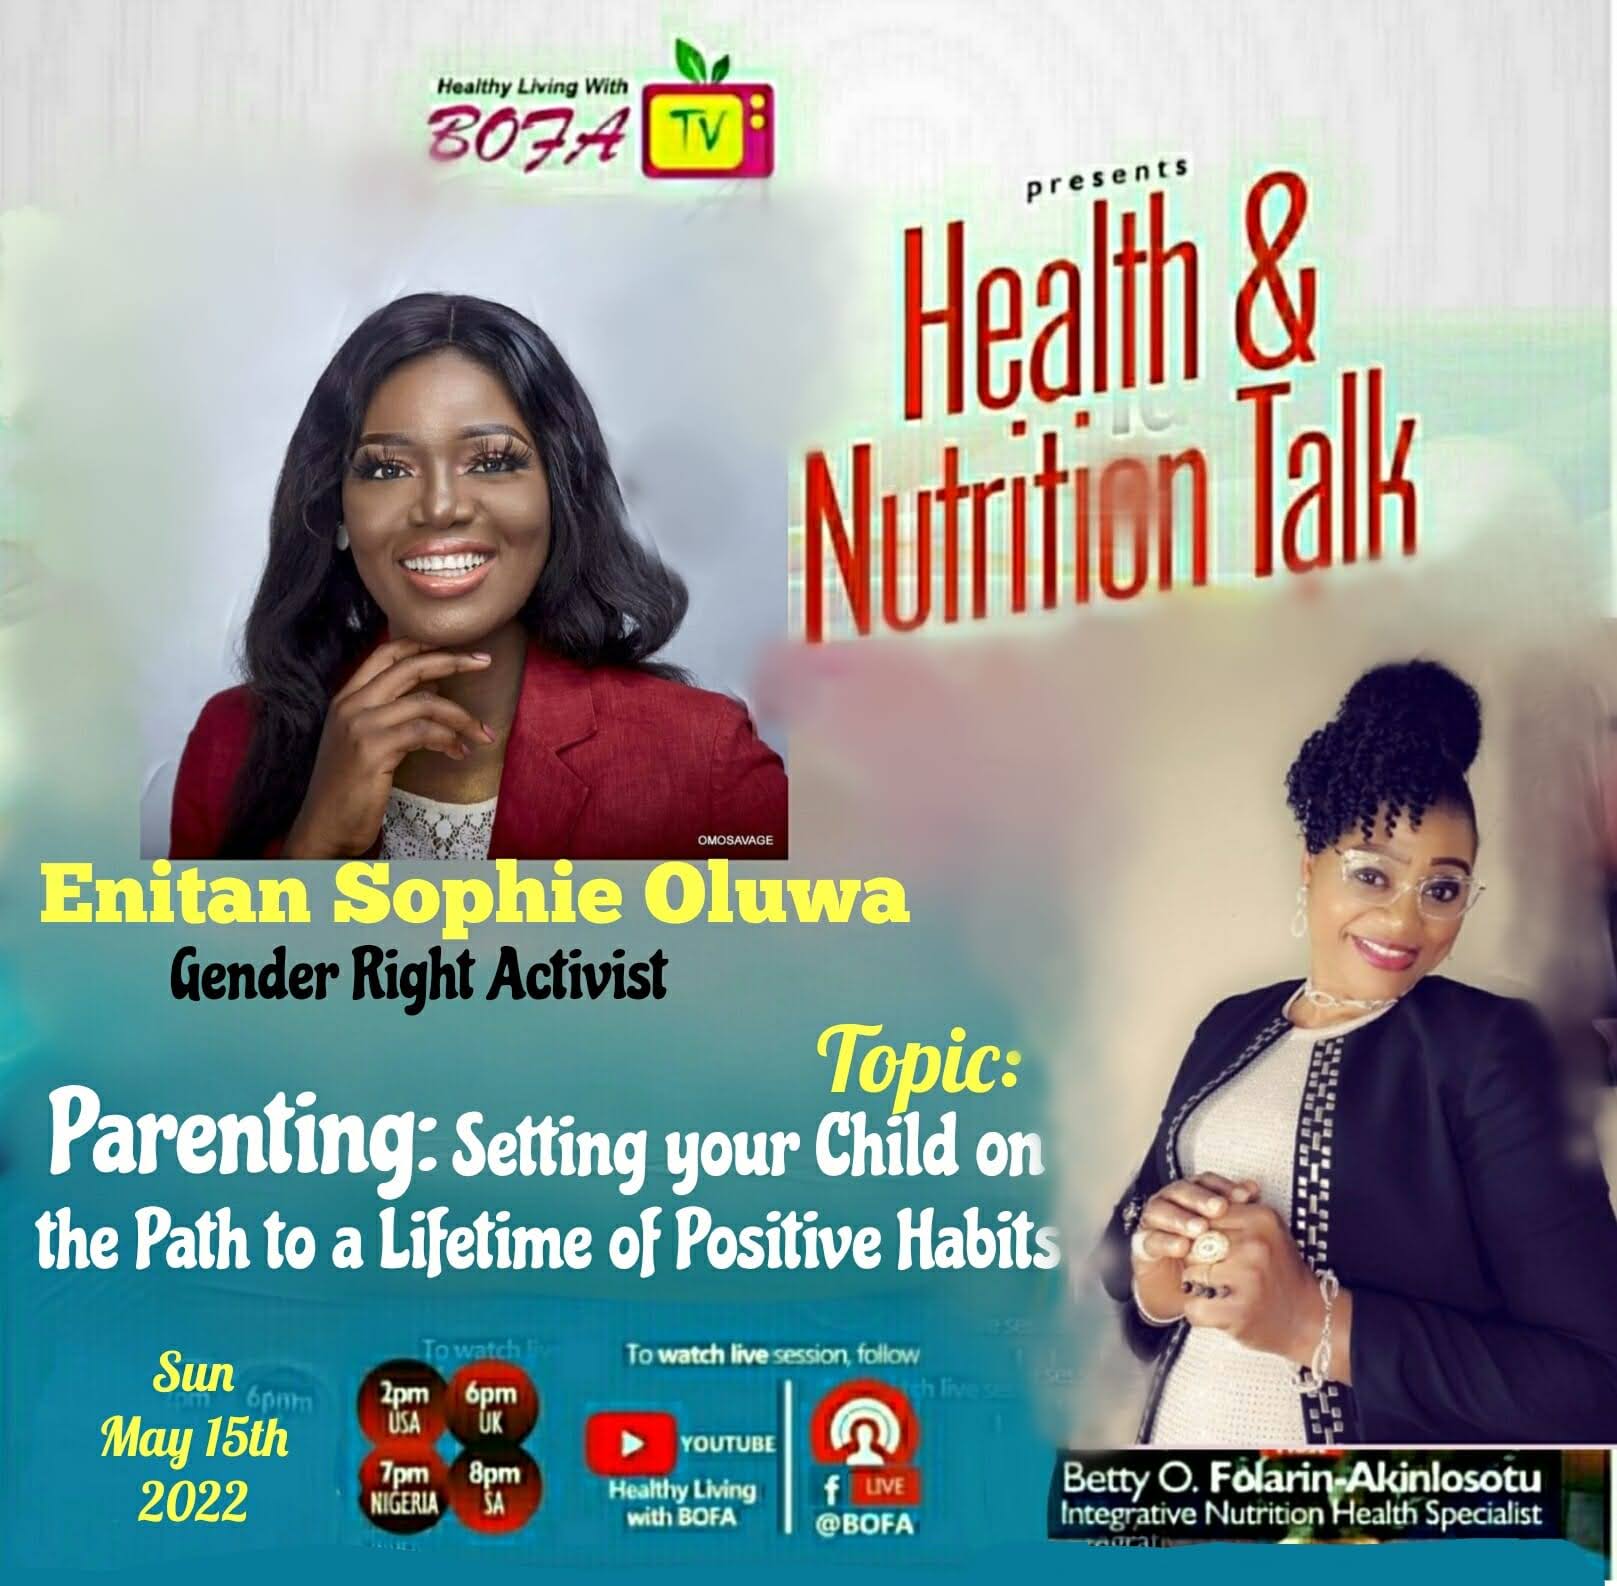 Healthy Living With BOFA Show Host Our CRO